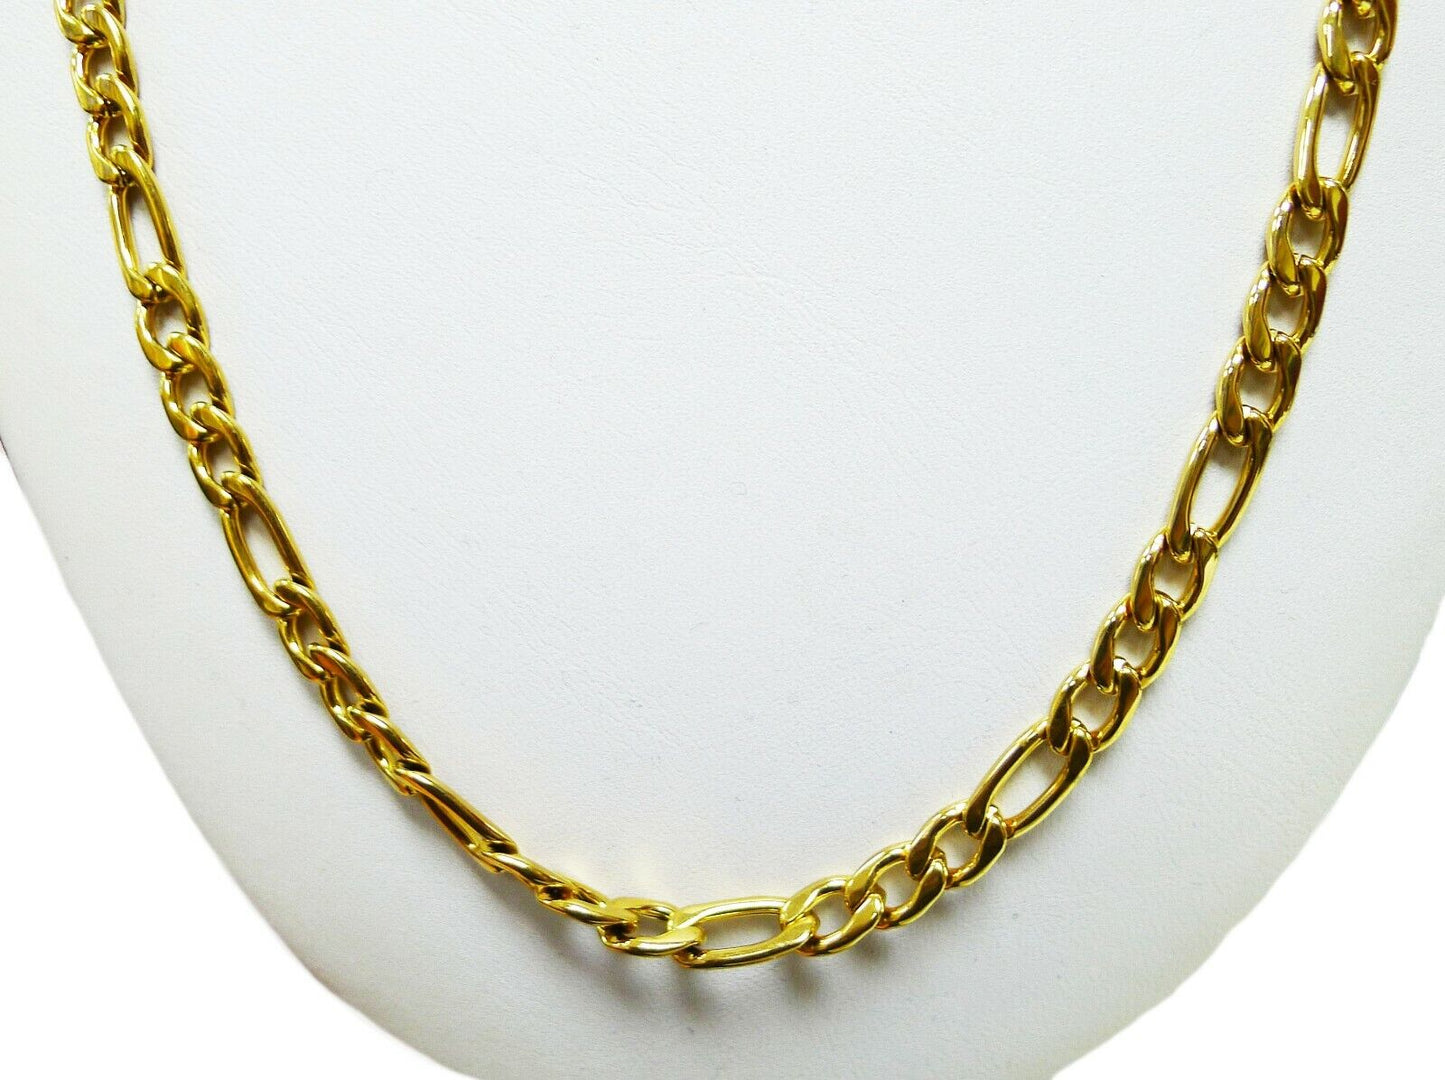 Stainless Steel Yellow Gold Color Figaro Link Chain Necklace 6MM Width up to 28"